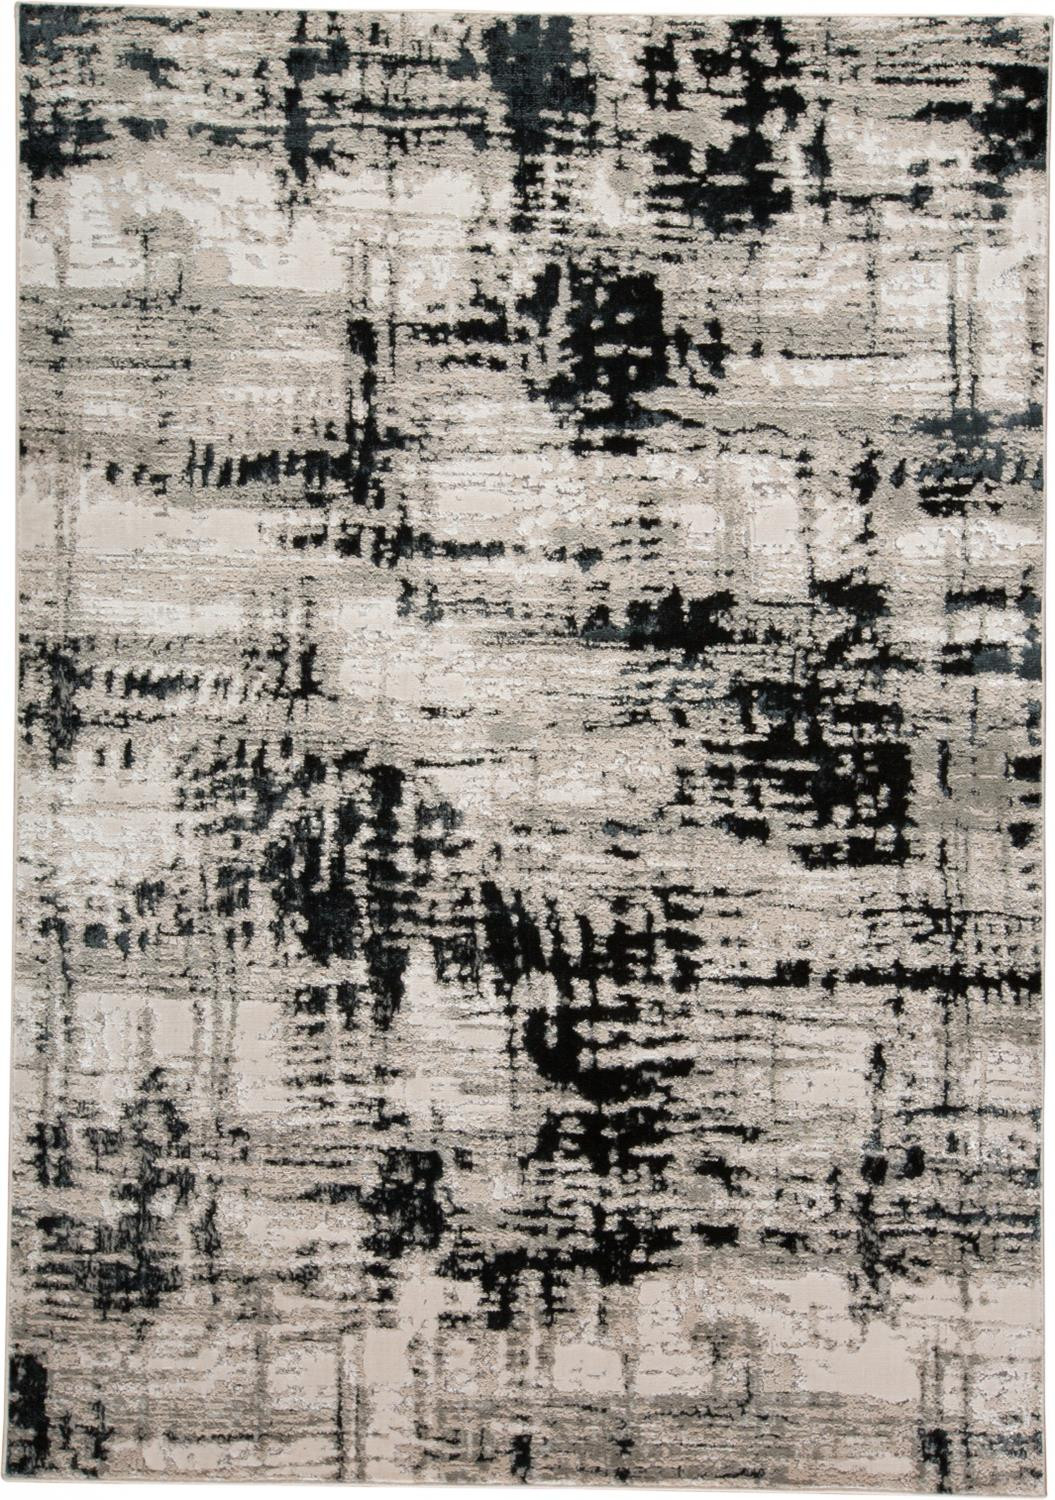 10' X 13' Black White And Gray Stain Resistant Area Rug-515024-1